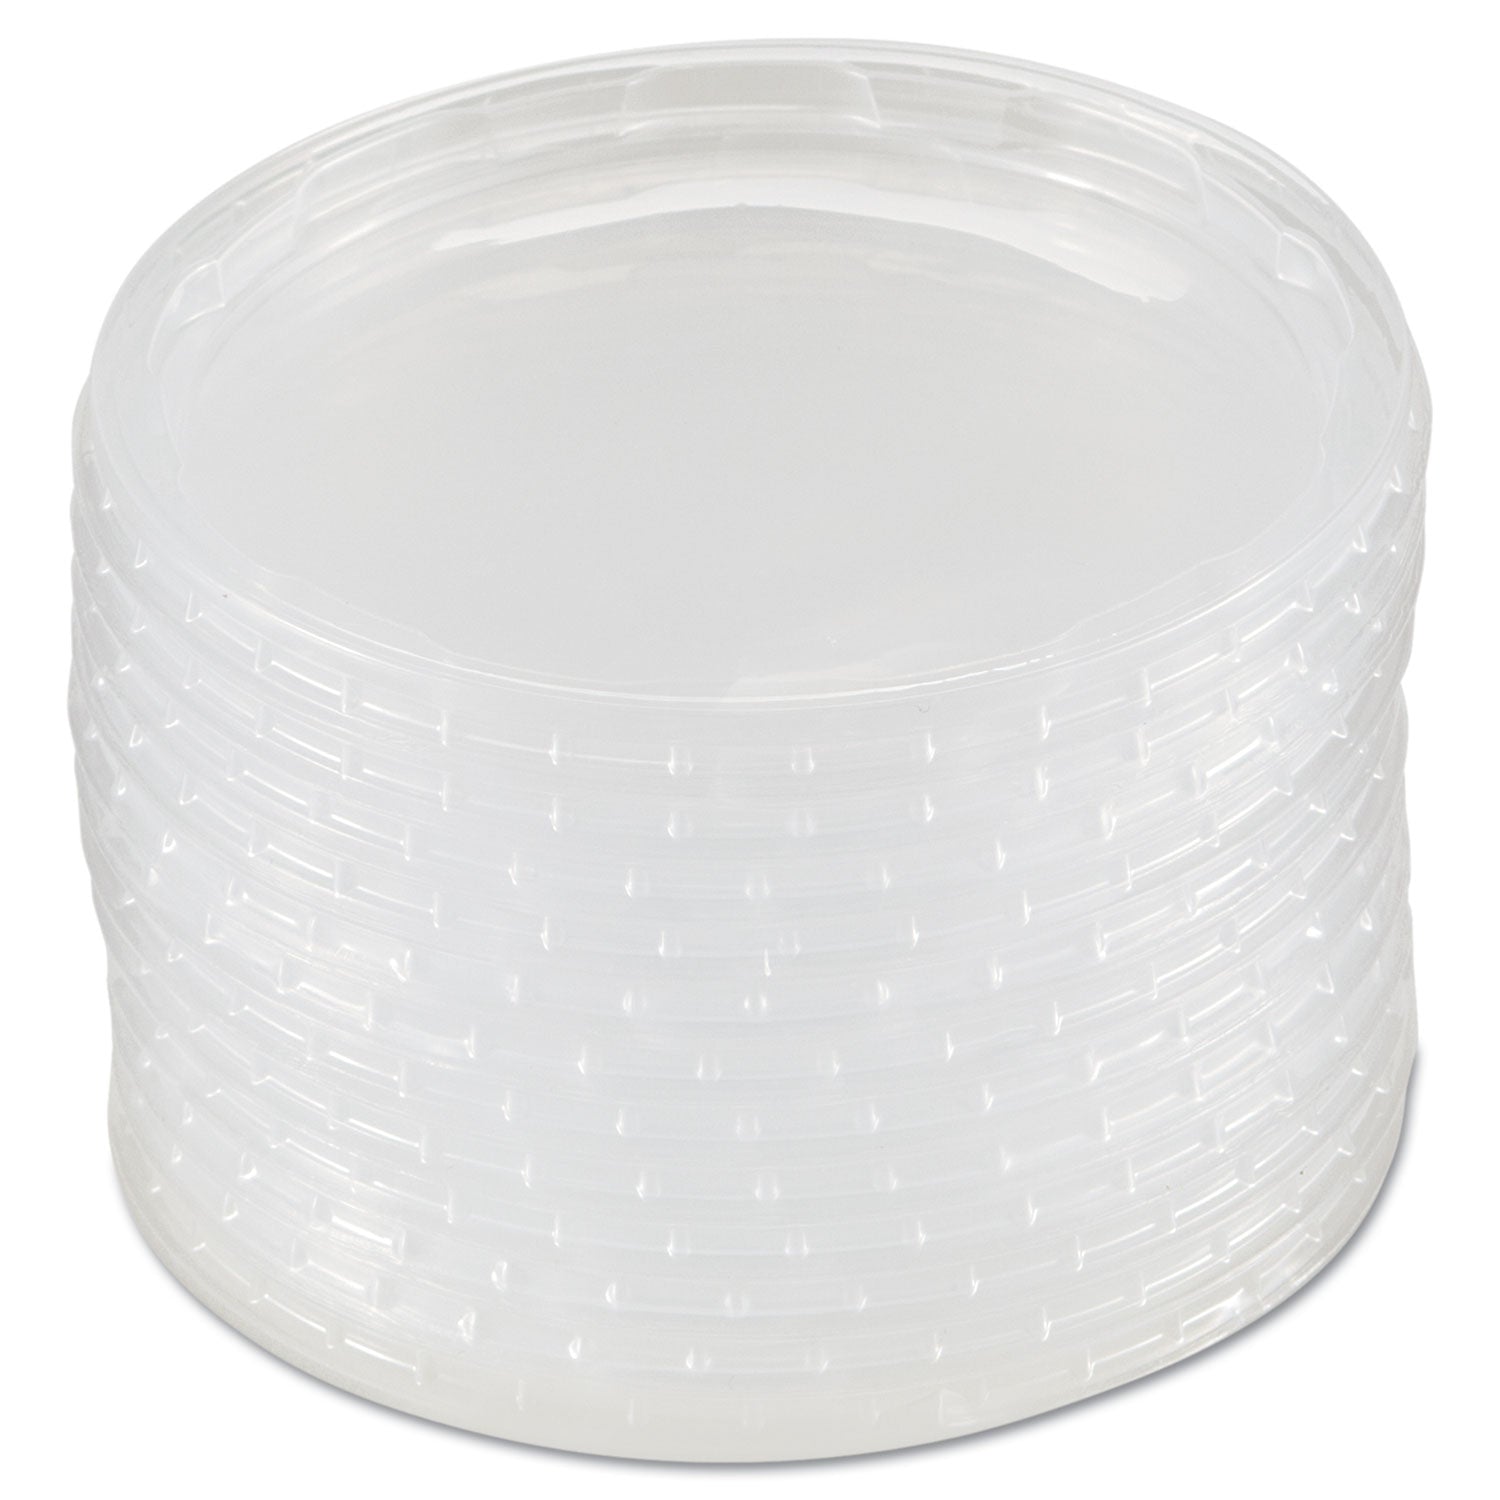 Deli Container Lids, Plug-Style, Clear, Plastic, 50/Pack, 10 Packs/Carton - 